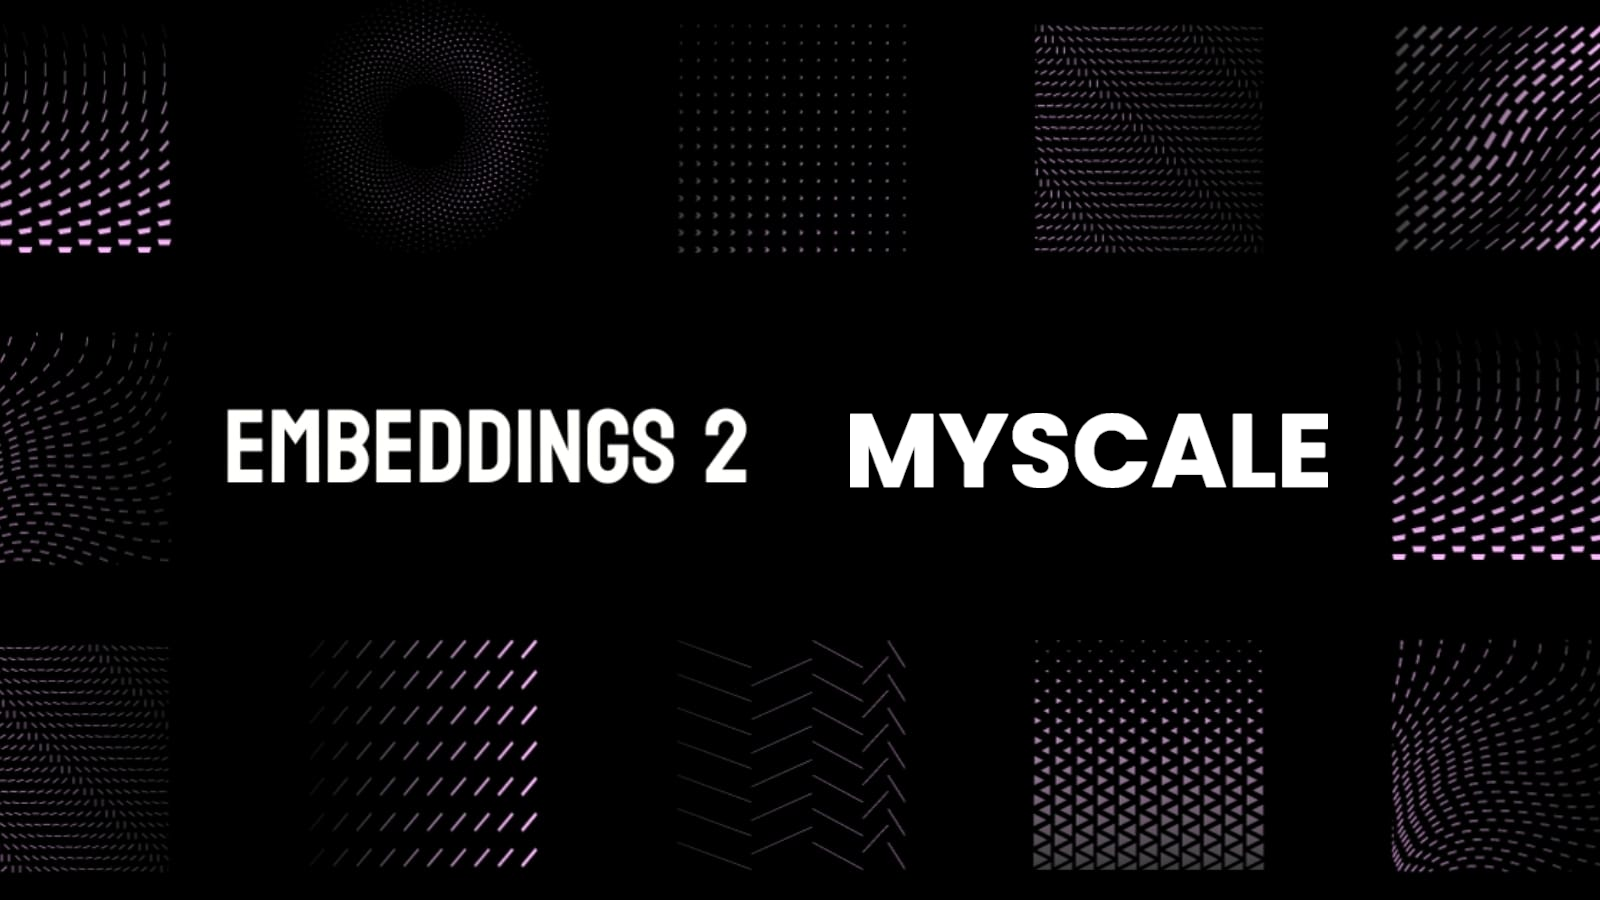 Contrastive black and white design with the text "EMBEDDINGS 2 MYSCALE" centered, creating an artistic academic vibe.